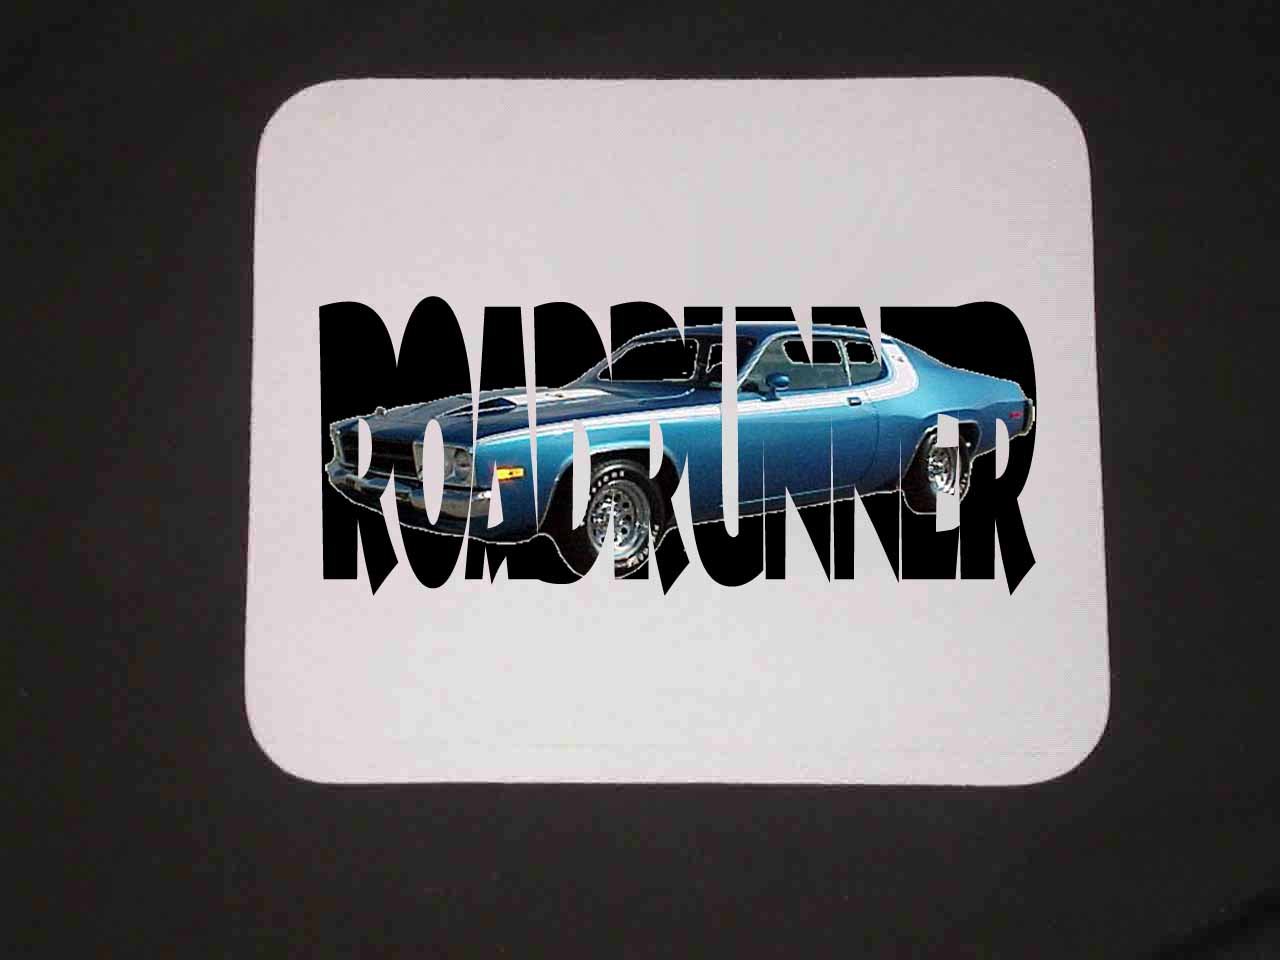 New 1973 Plymouth Roadrunner w/ letters Mousepad!!